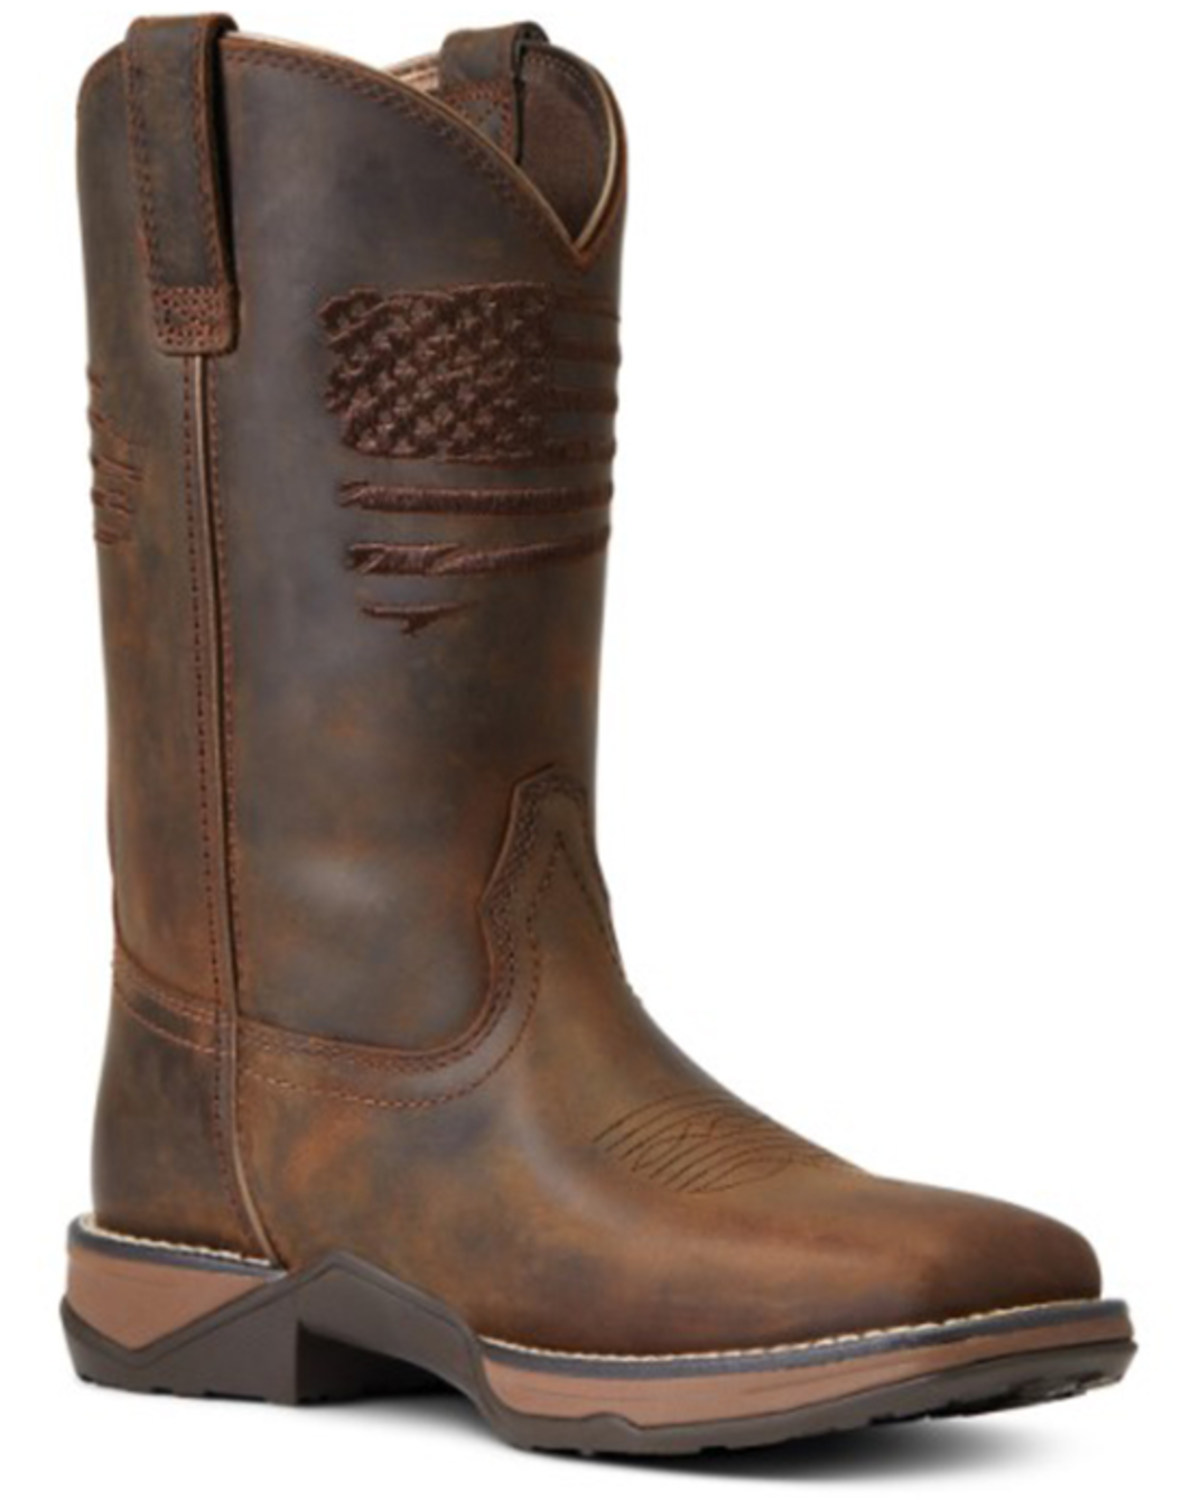 Ariat Women's Anthem Patriot Western Performance Boots - Broad Square Toe